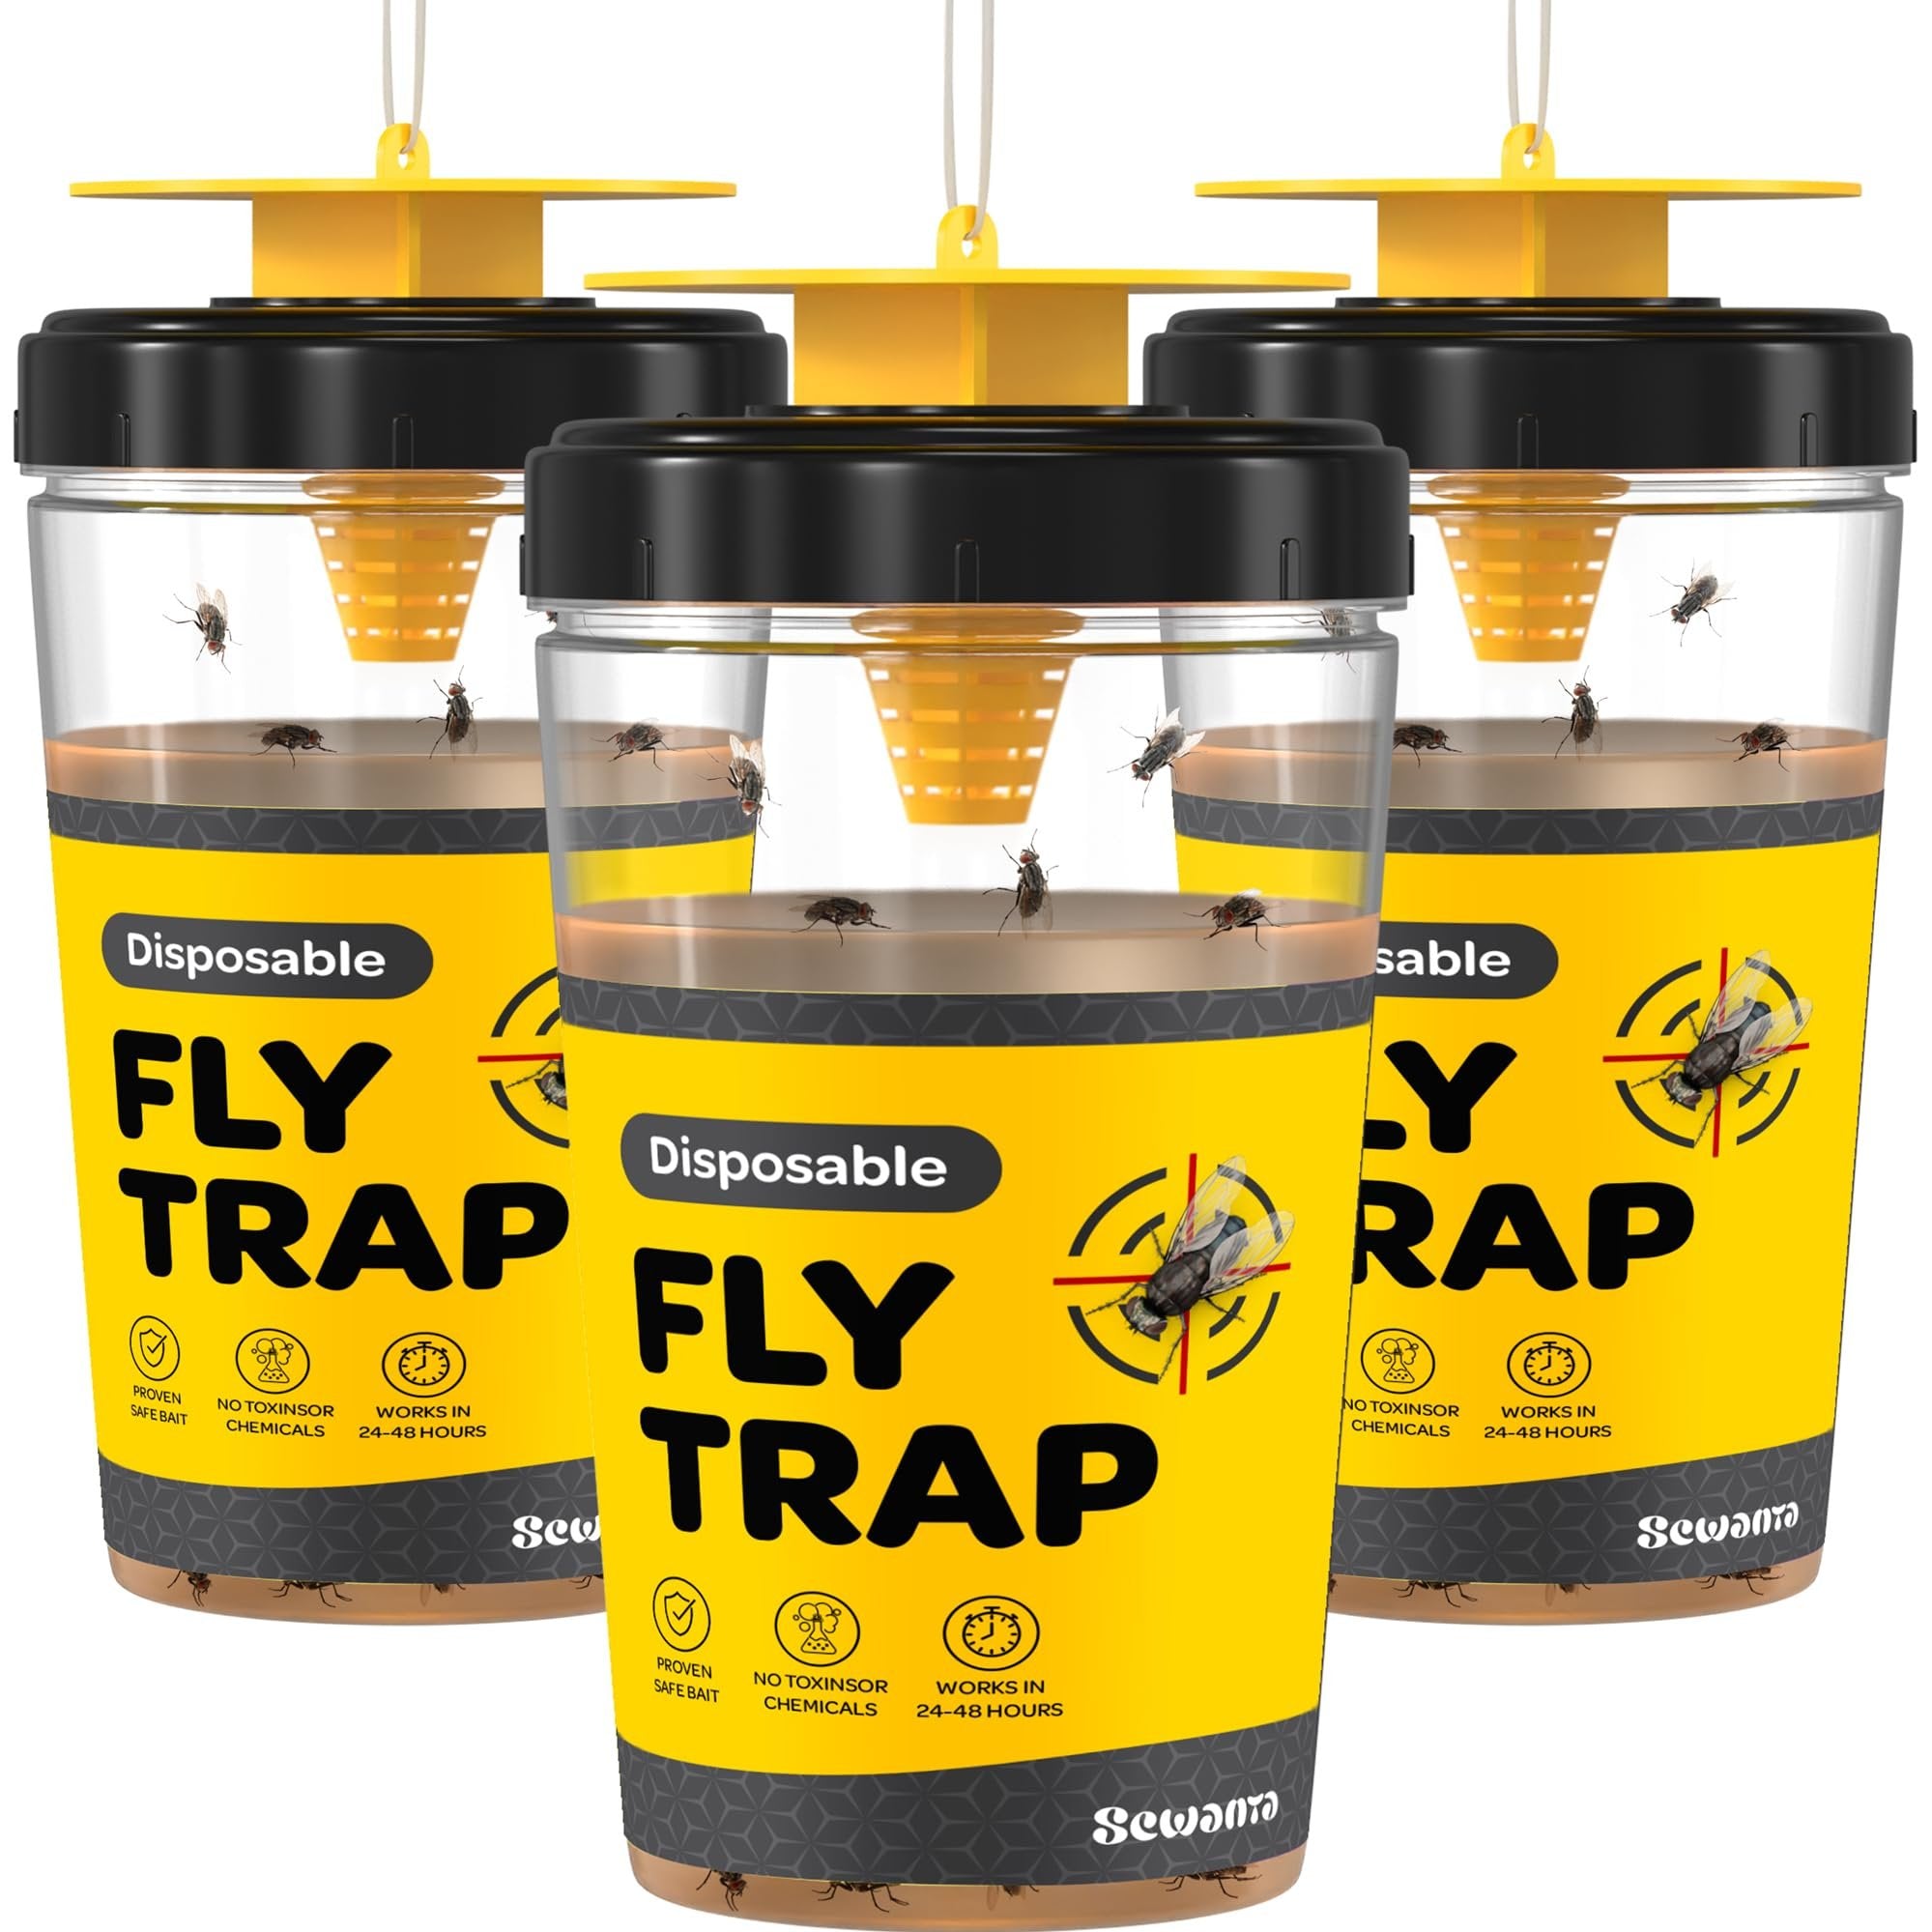 Outdoor Fly Trap [Set of 3] Fly Traps Outdoor with Dissolvable Non-Toxic Bait - Fly Repellent for Outdoor Use Only - Controls Flies for Patios, Barns, Ranches Etc. Hanging Fly Traps with Tie Included